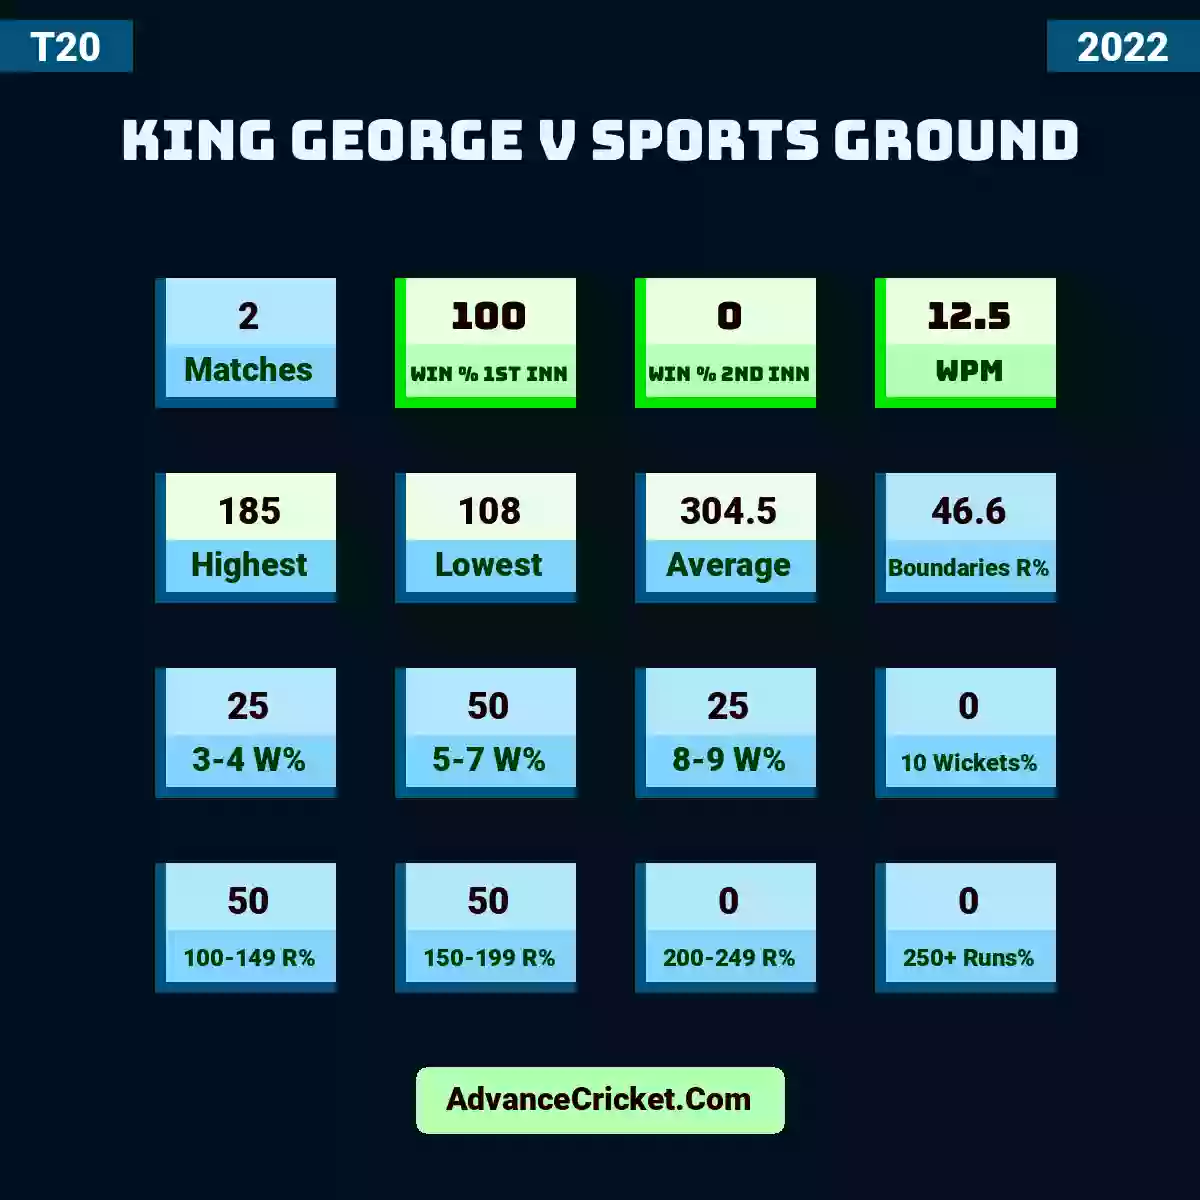 Image showing King George V Sports Ground with Matches: 2, Win % 1st Inn: 100, Win % 2nd Inn: 0, WPM: 12.5, Highest: 185, Lowest: 108, Average: 304.5, Boundaries R%: 46.6, 3-4 W%: 25, 5-7 W%: 50, 8-9 W%: 25, 10 Wickets%: 0, 100-149 R%: 50, 150-199 R%: 50, 200-249 R%: 0, 250+ Runs%: 0.